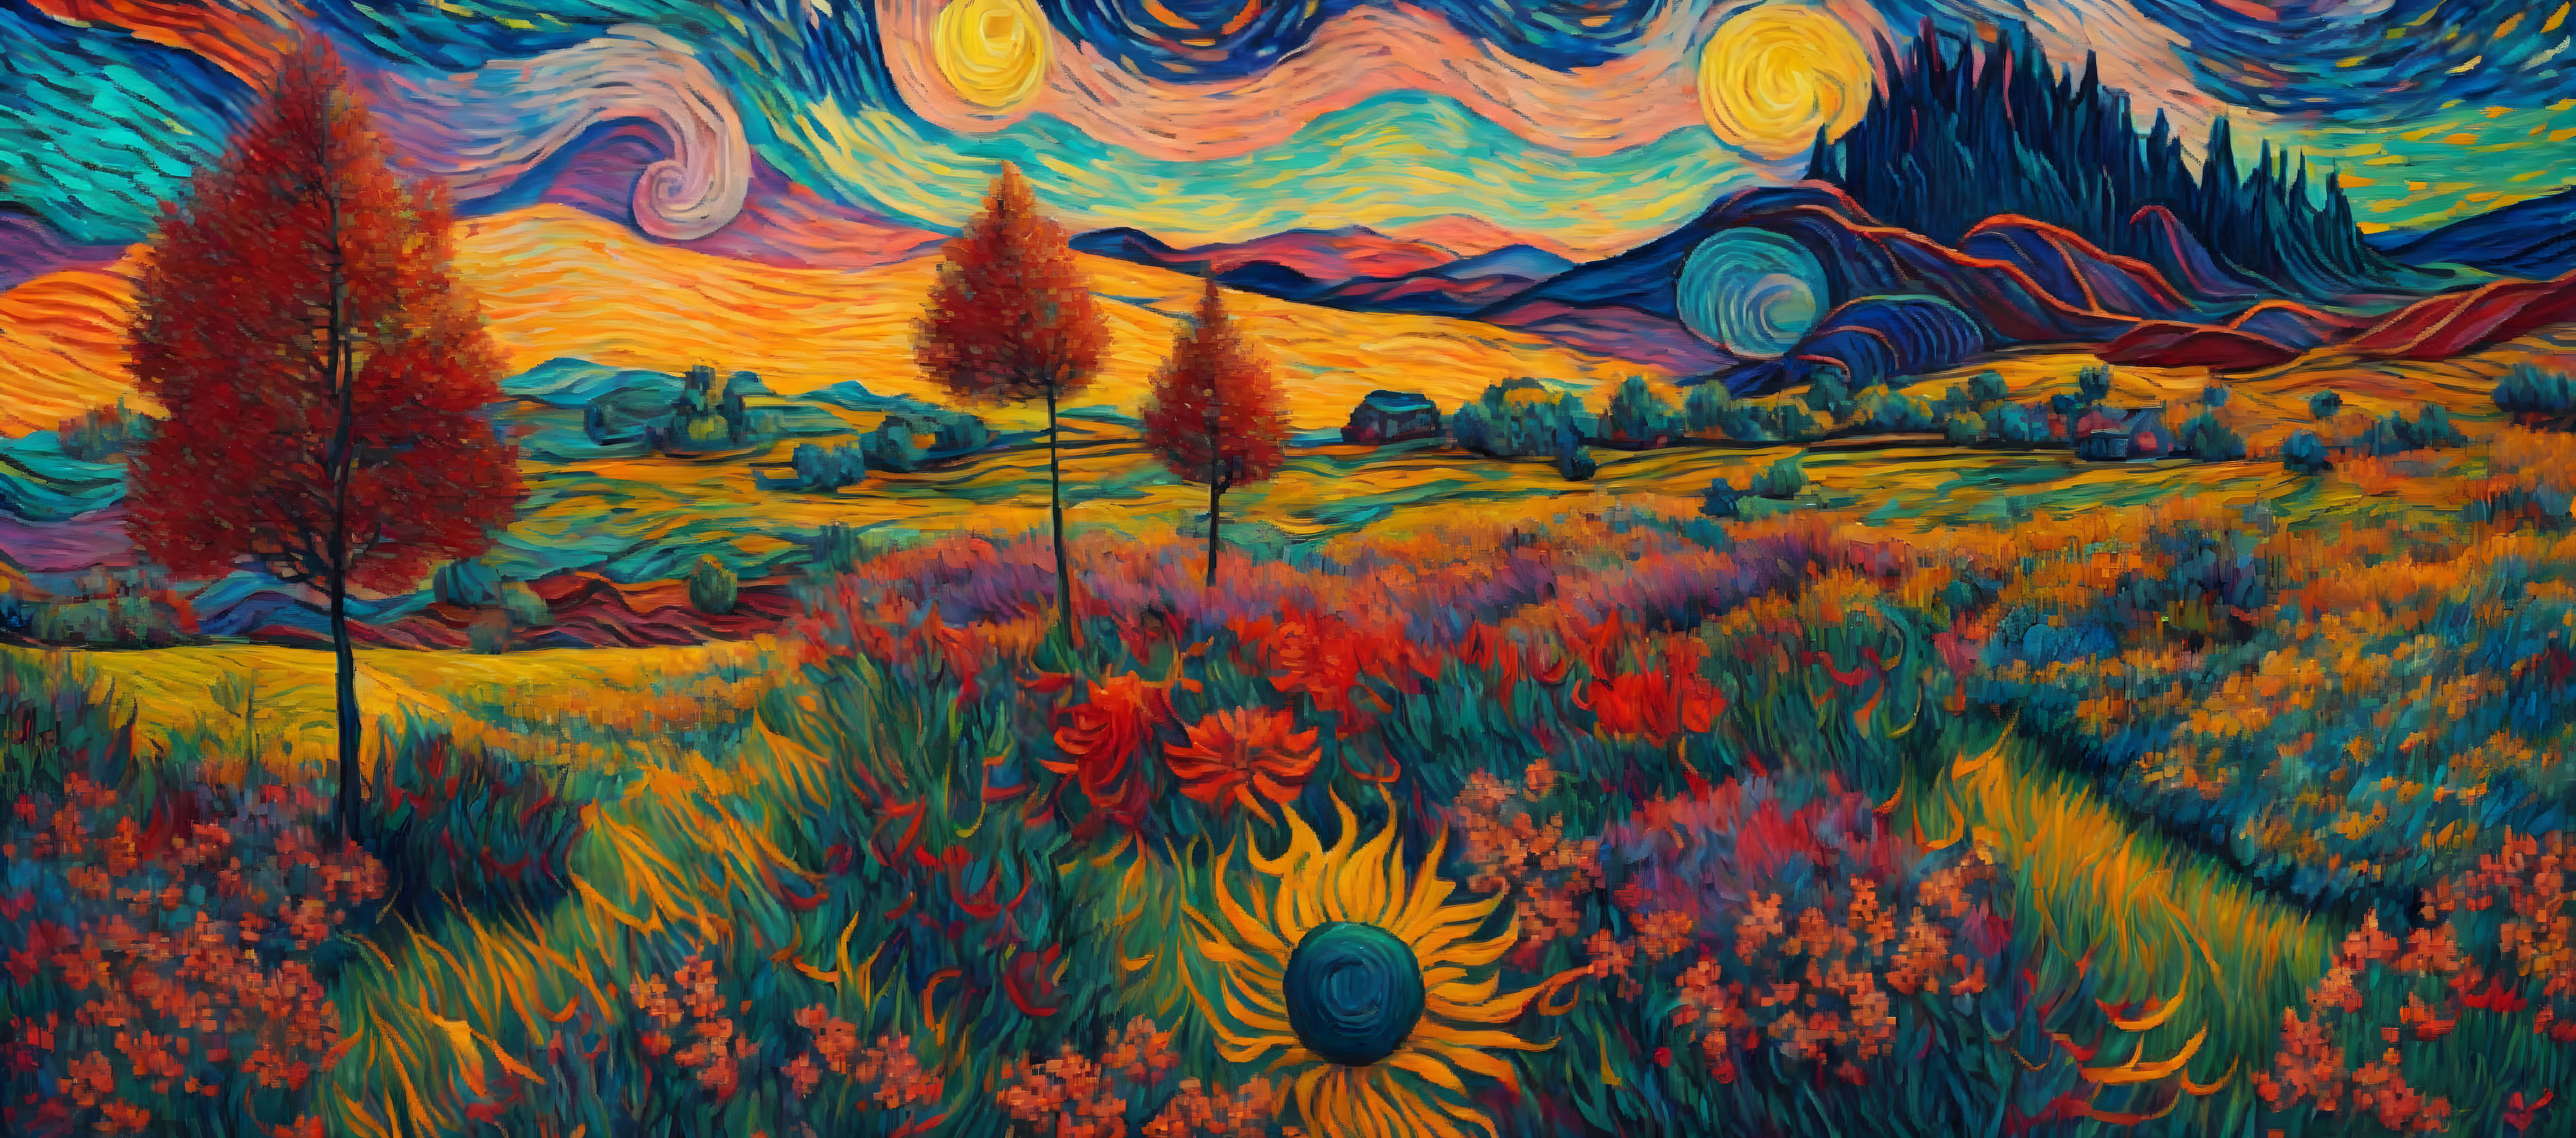 Colorful landscape painting with swirling skies, red trees, sunflowers, and rolling hills